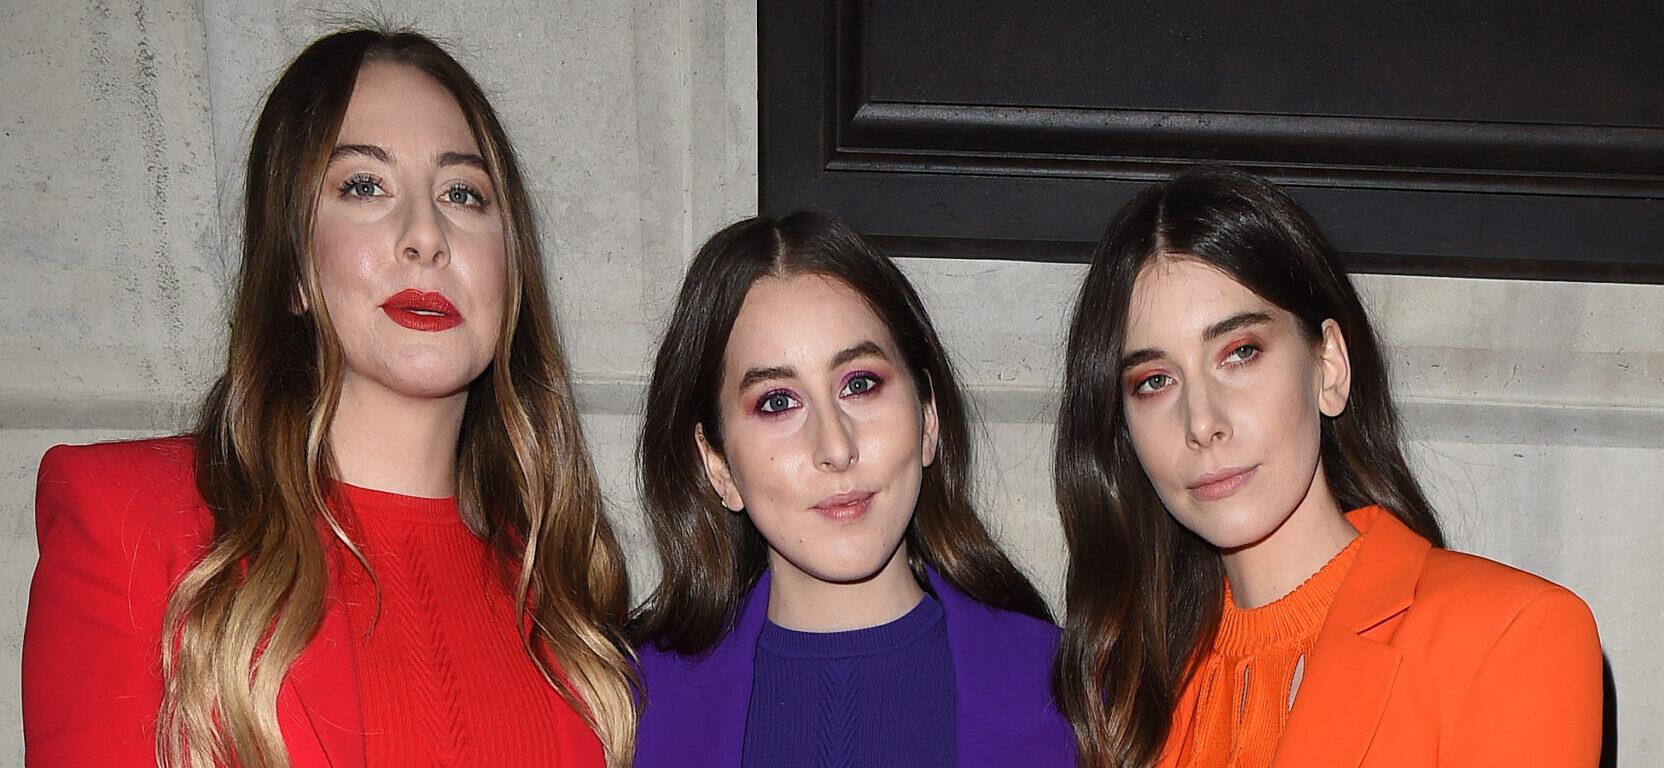 Girl group Haim arrive at the Brit Awards Universal Music Afterparty held at The Ned hotel